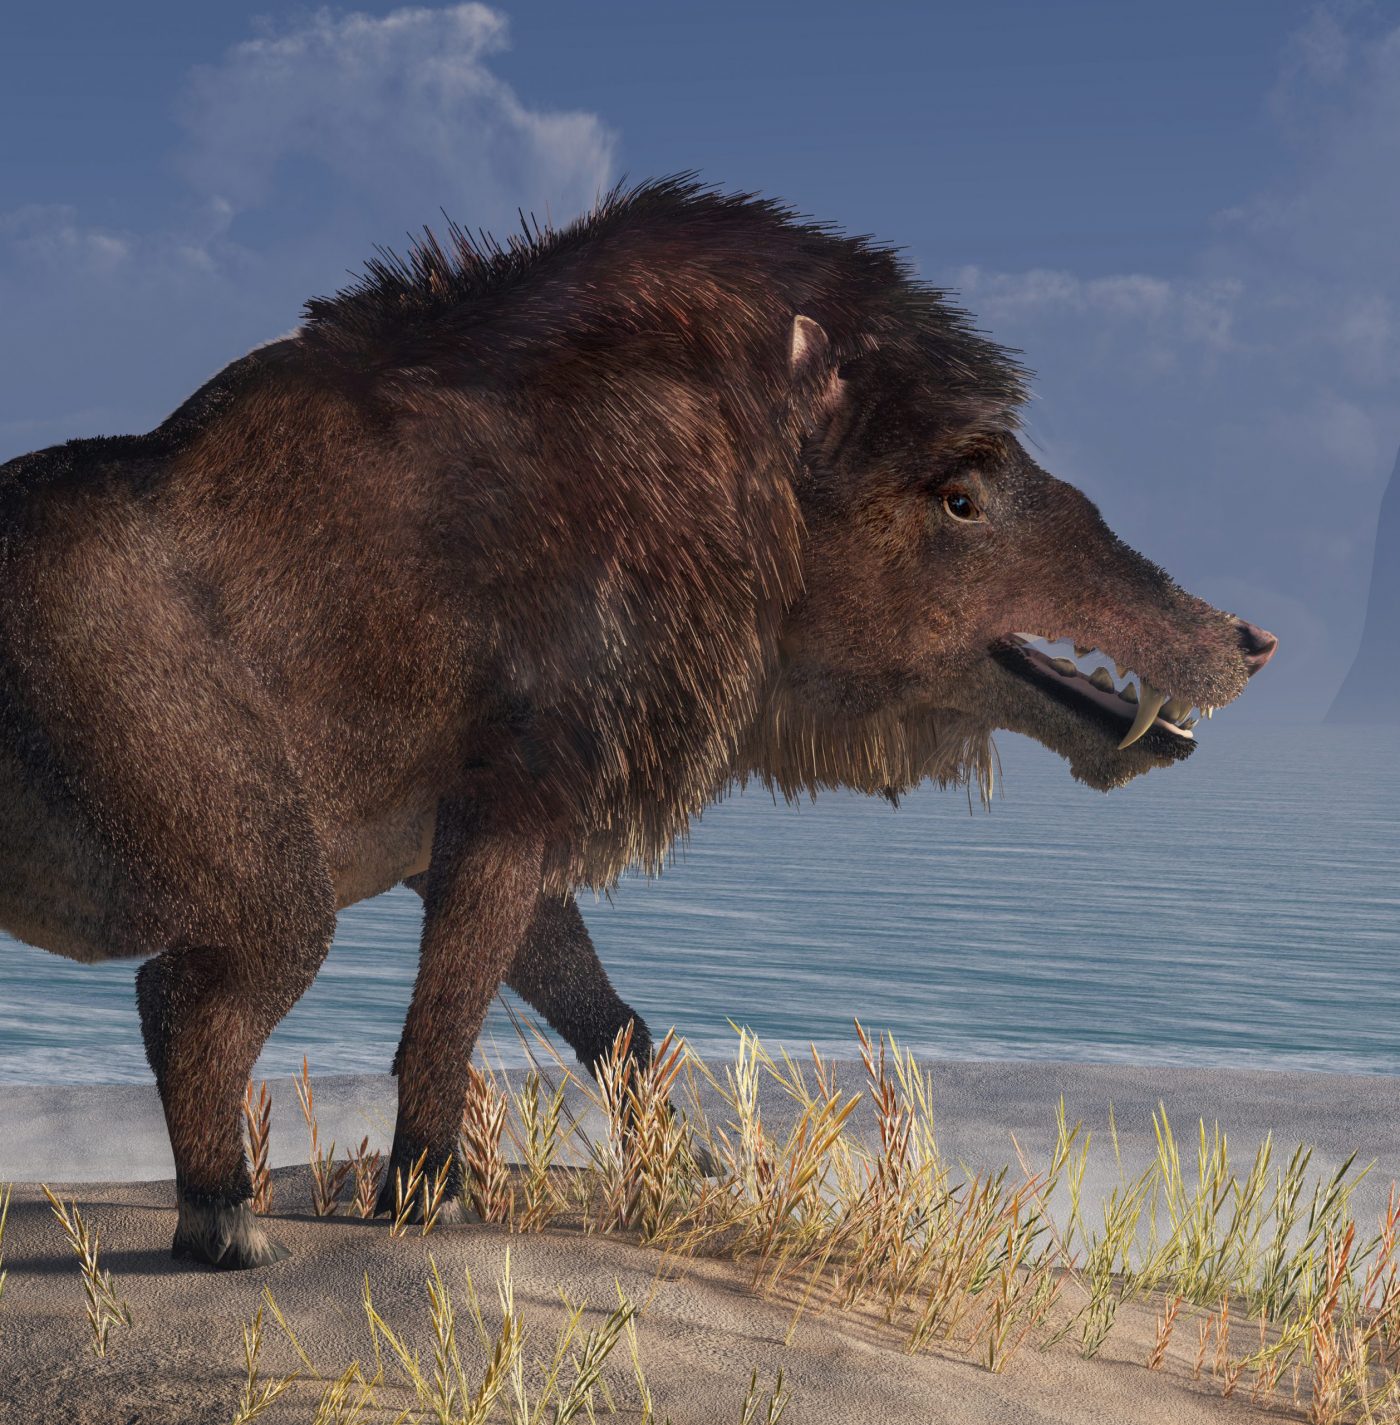 Andrewsarchus, an extinct creature of the Eocene period, was possibly the largest carnivorous land mammal ever, known only from a single fossil skull found in Mongolia. 3D Rendering.